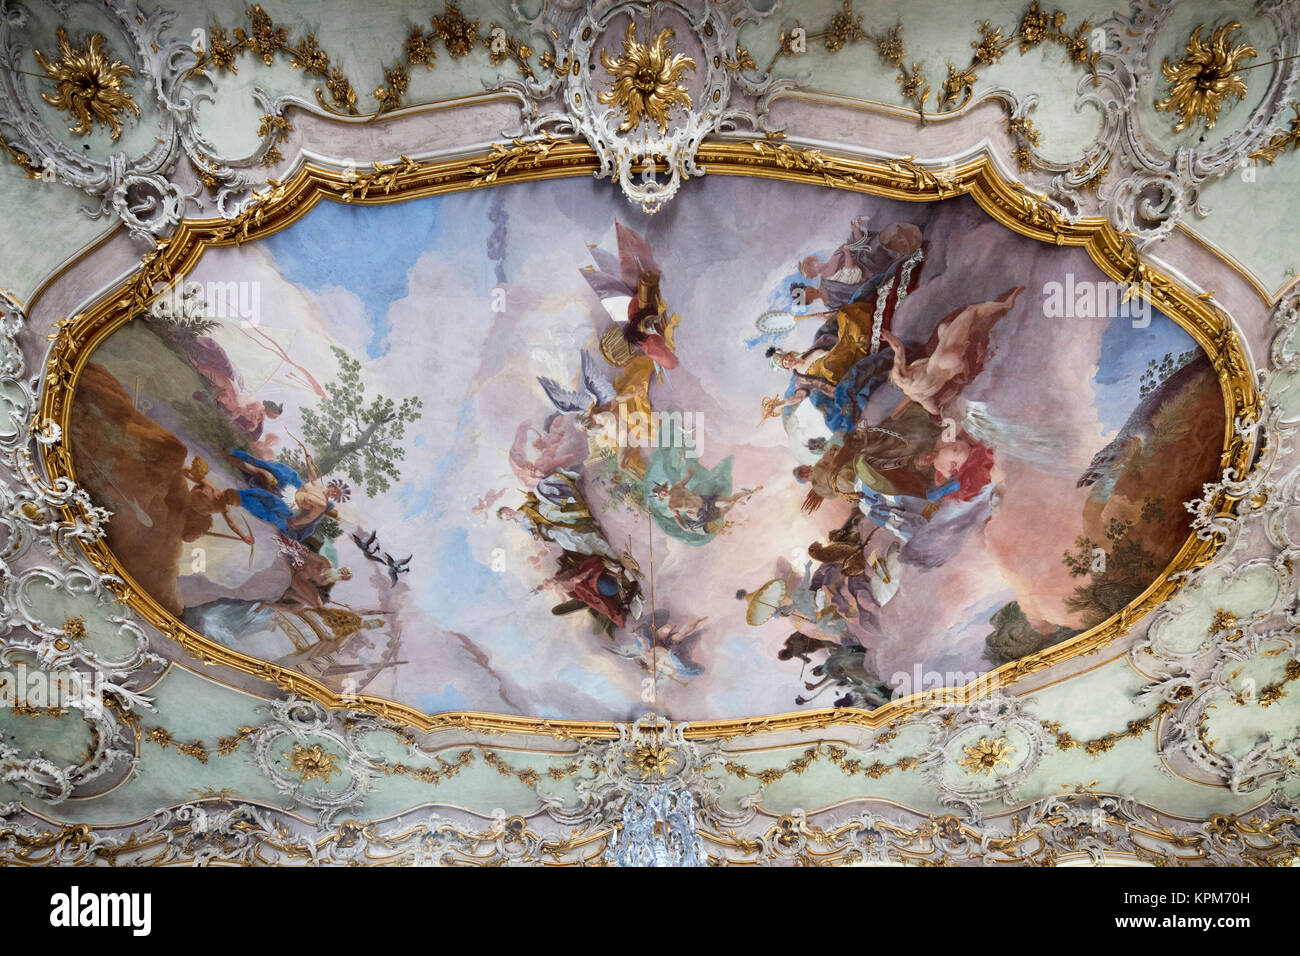 detail of painted ceiling of Rococco ballroom (1770) of the Schaezlerpalais baroque palace, Augsburg, Bavaria, Germany Stock Photo